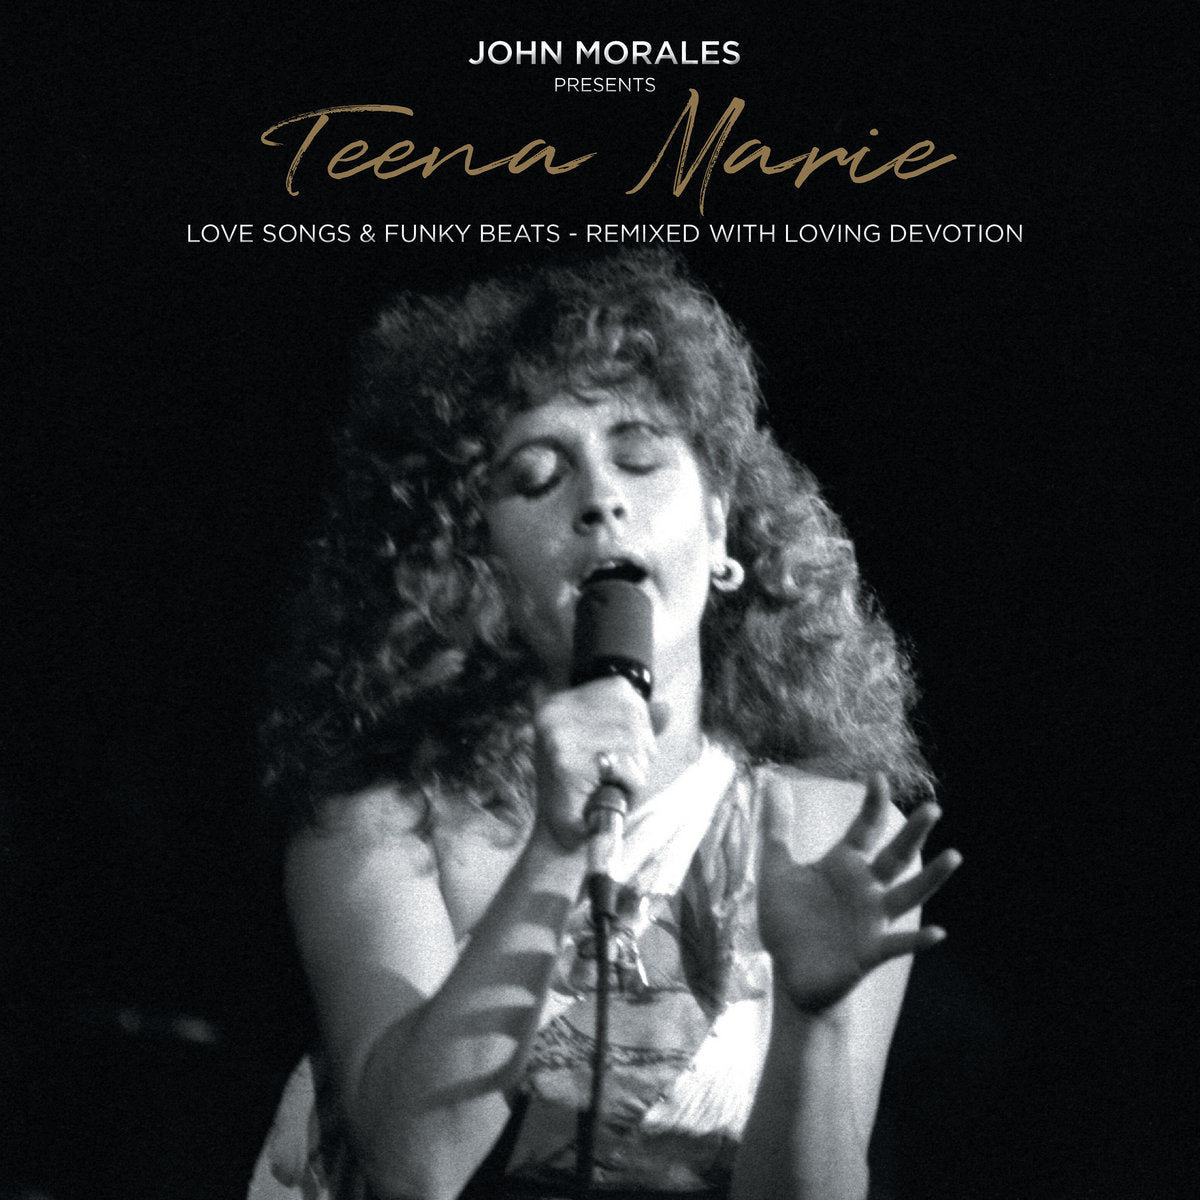 TEENA MARIE - John Morales Presents... Love Songs and Funky Beats - Remixed With Loving Devotion - 3 X 12" - Vinyl